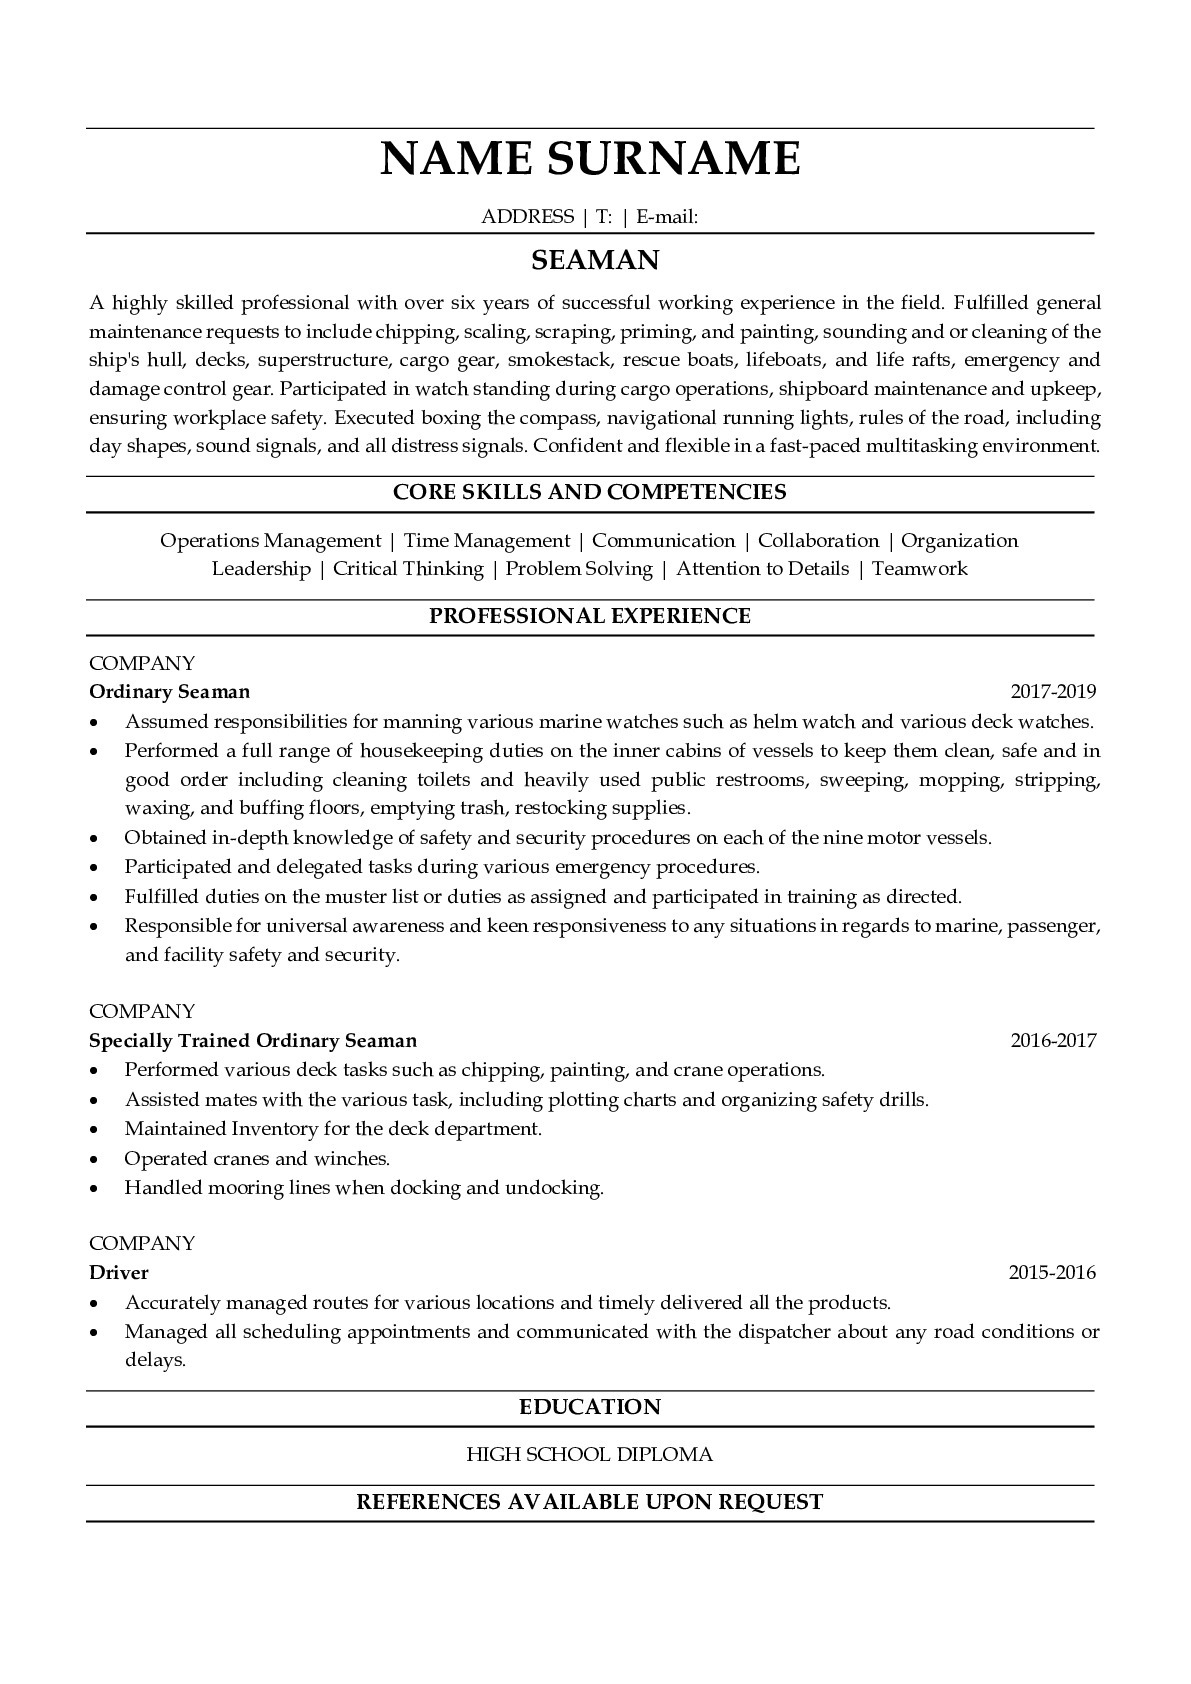 Resume Example for Seaman